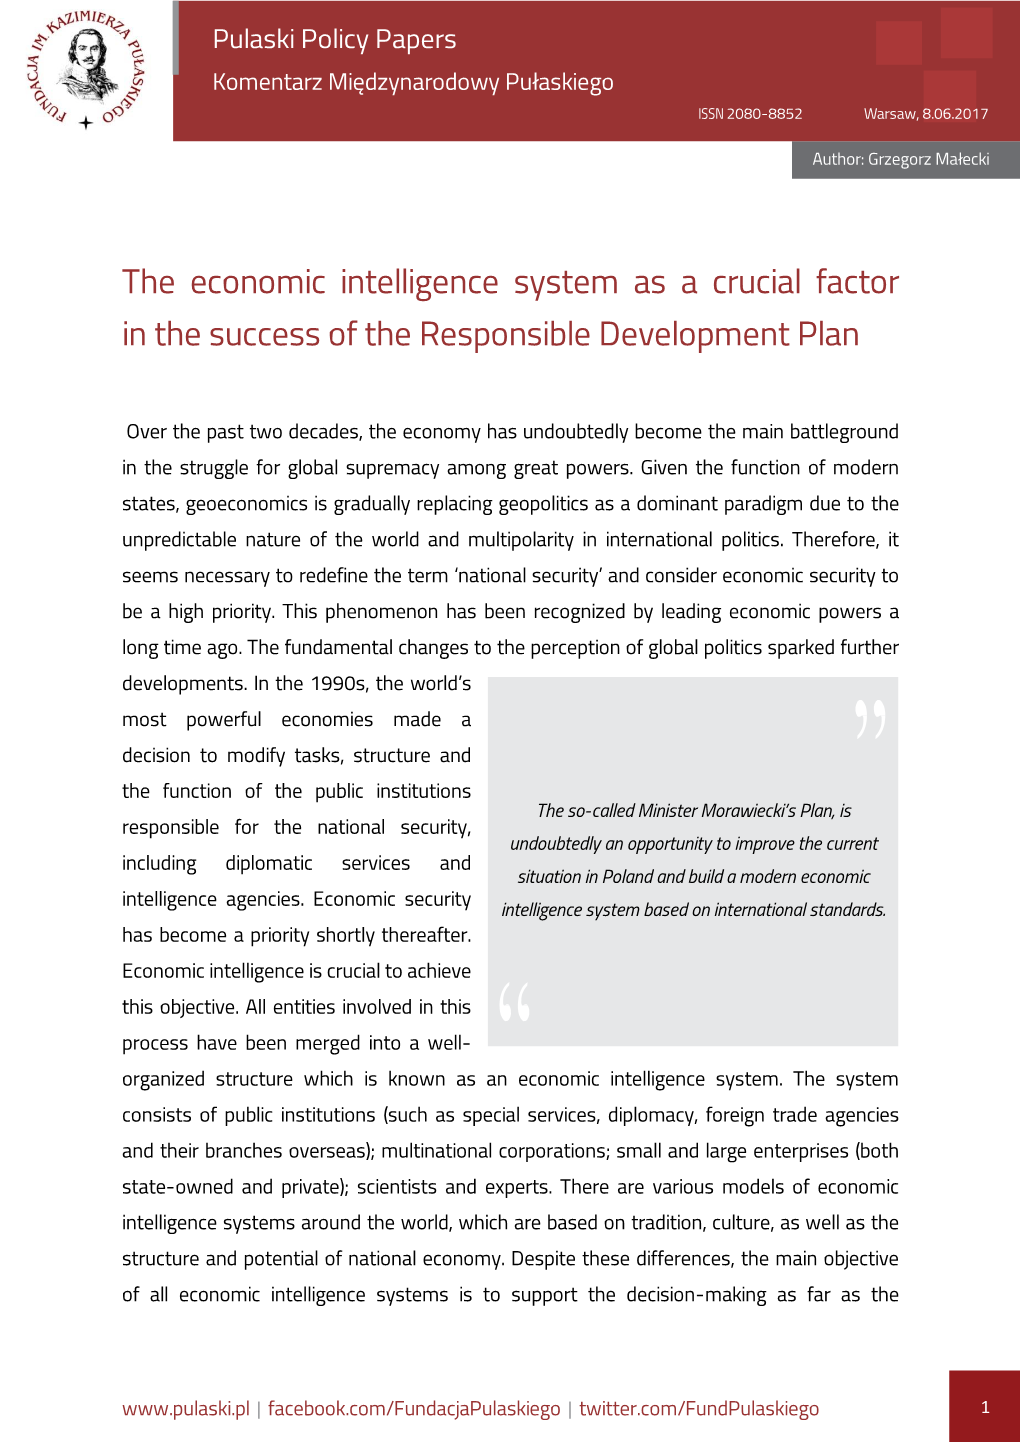 The Economic Intelligence System As a Crucial Factor in the Success of the Responsible Development Plan